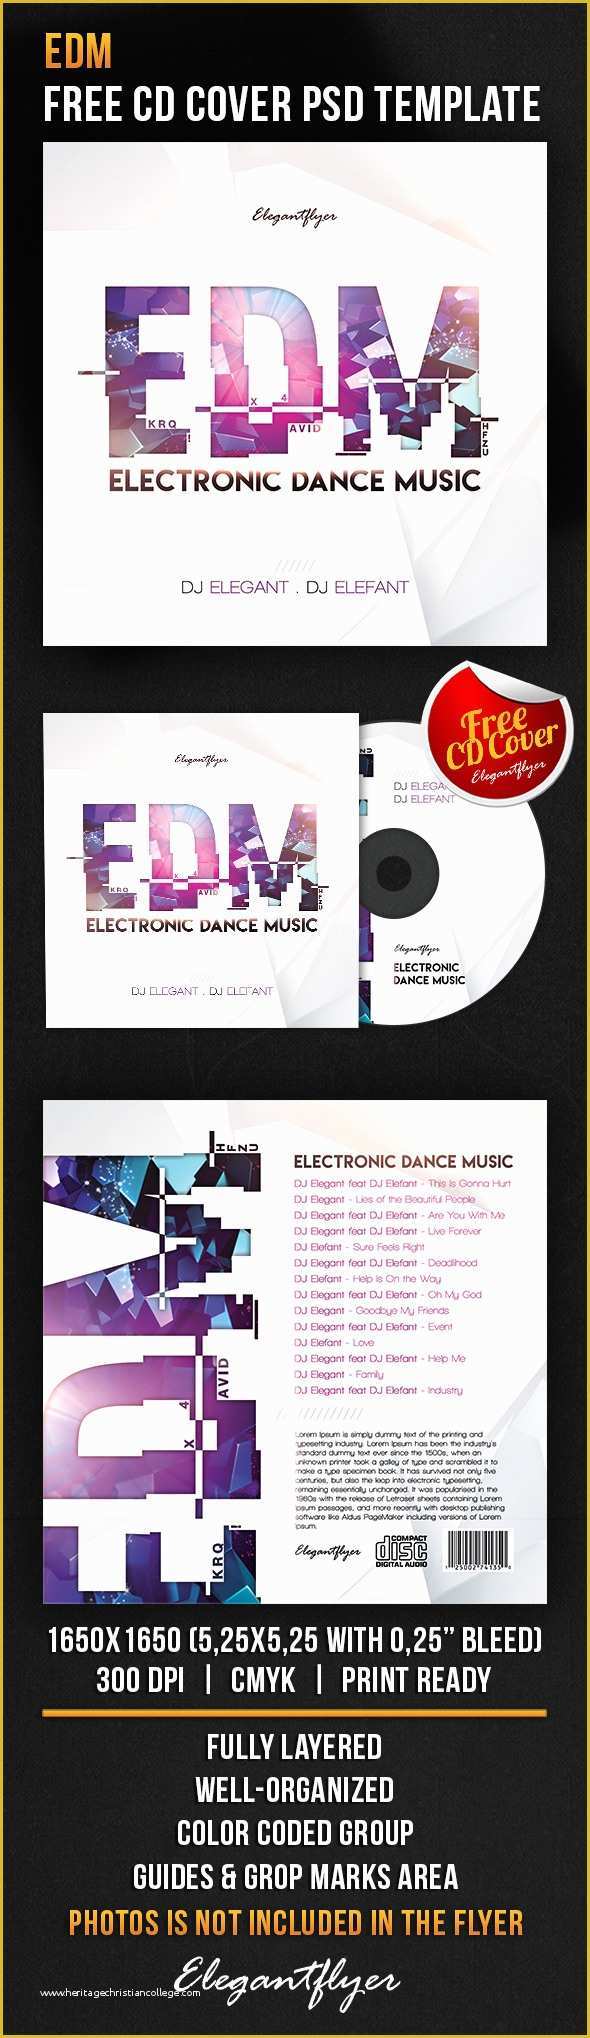 Free Printable Cd Cover Template Of Edm – Free Cd Cover Psd Template – by Elegantflyer